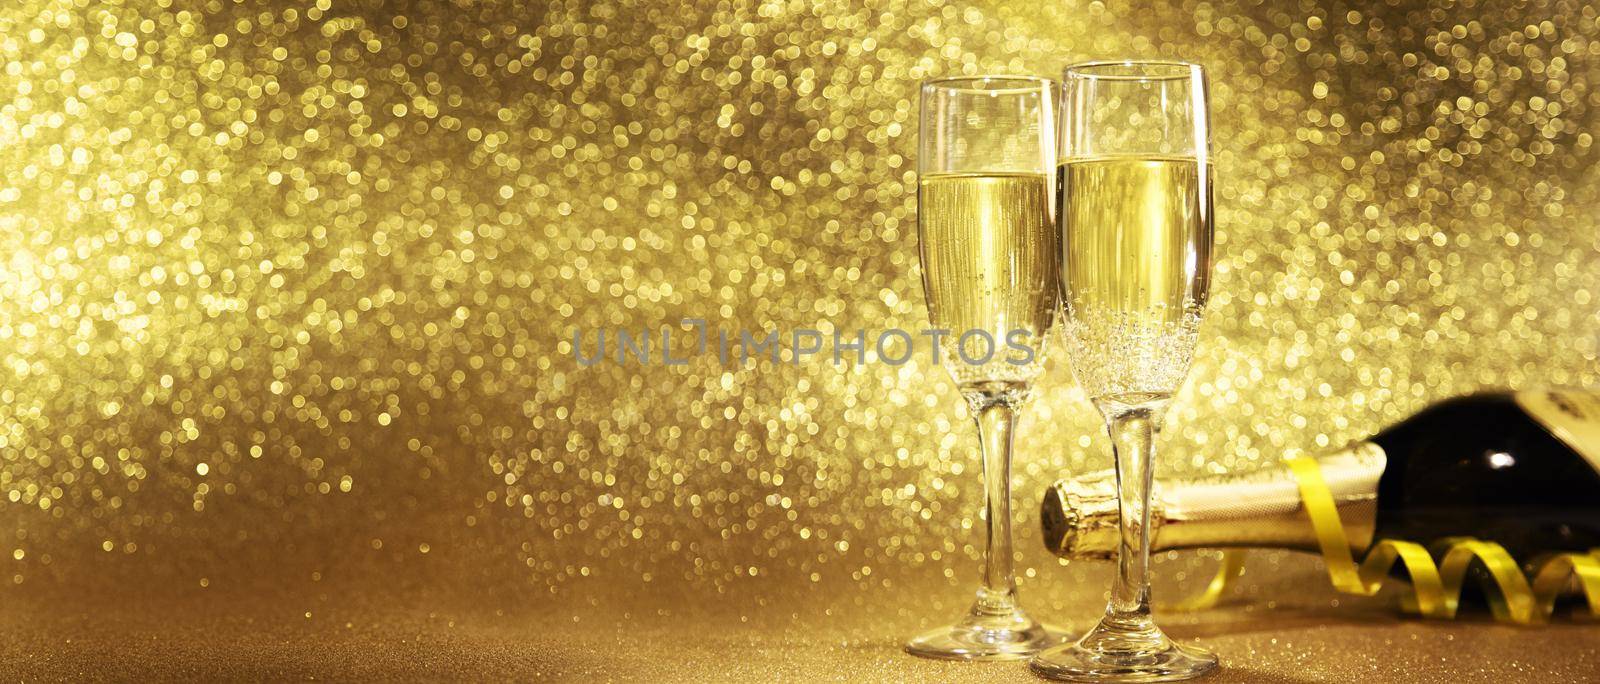 New years eve celebration background with champagne by Taut